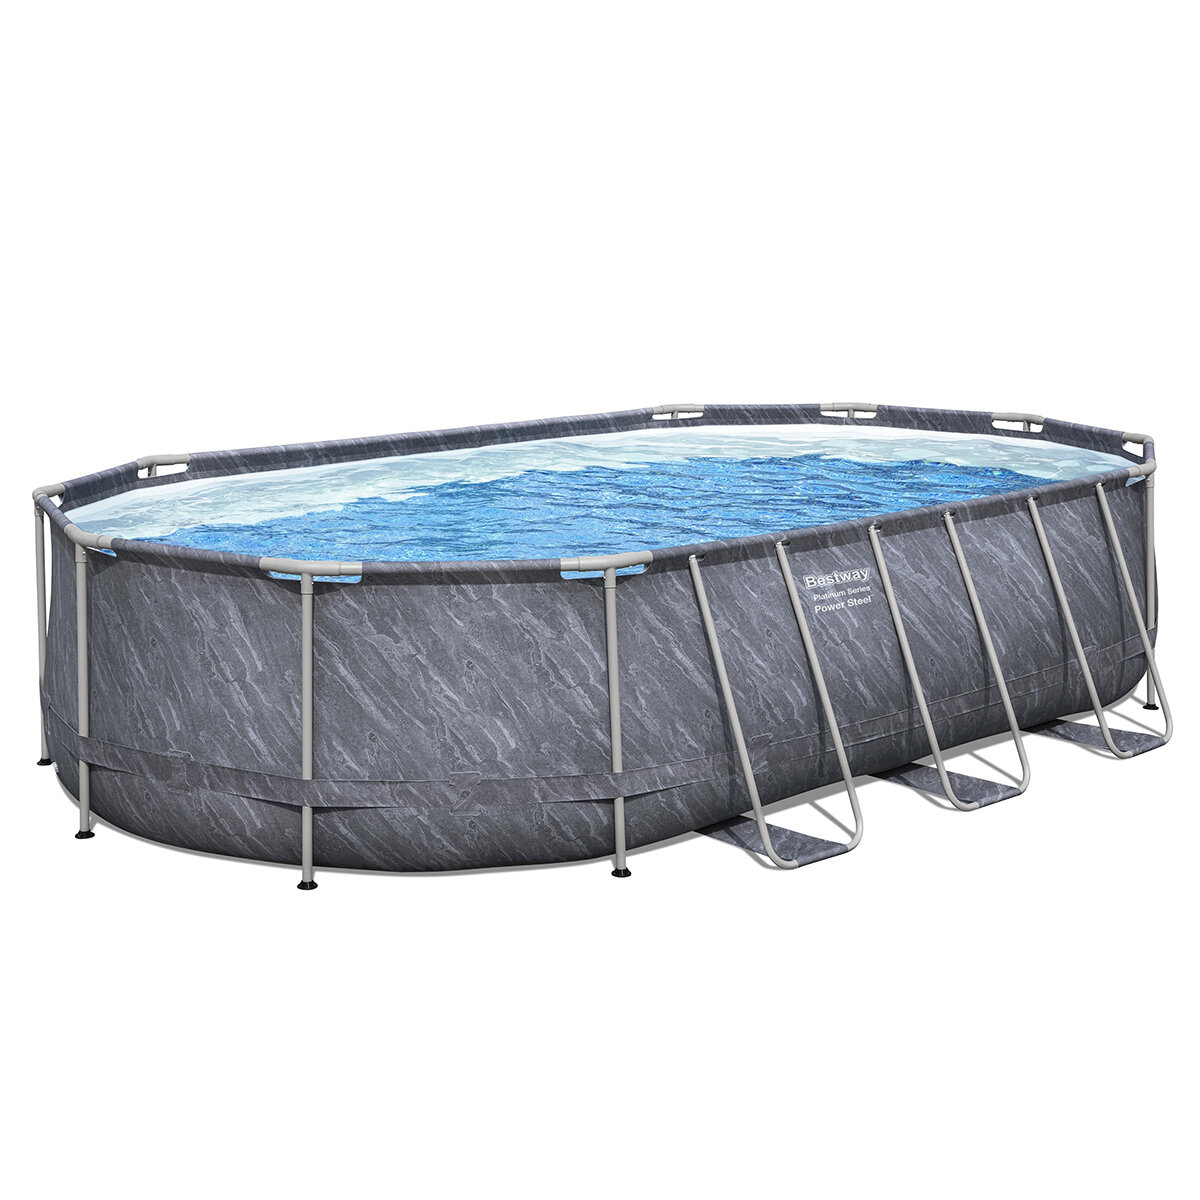 Bestway 20ft x 12ft Platinum Series Power Steel Oval Frame Pool with Sand Filter Pump and Solar Powered Pool Pad 